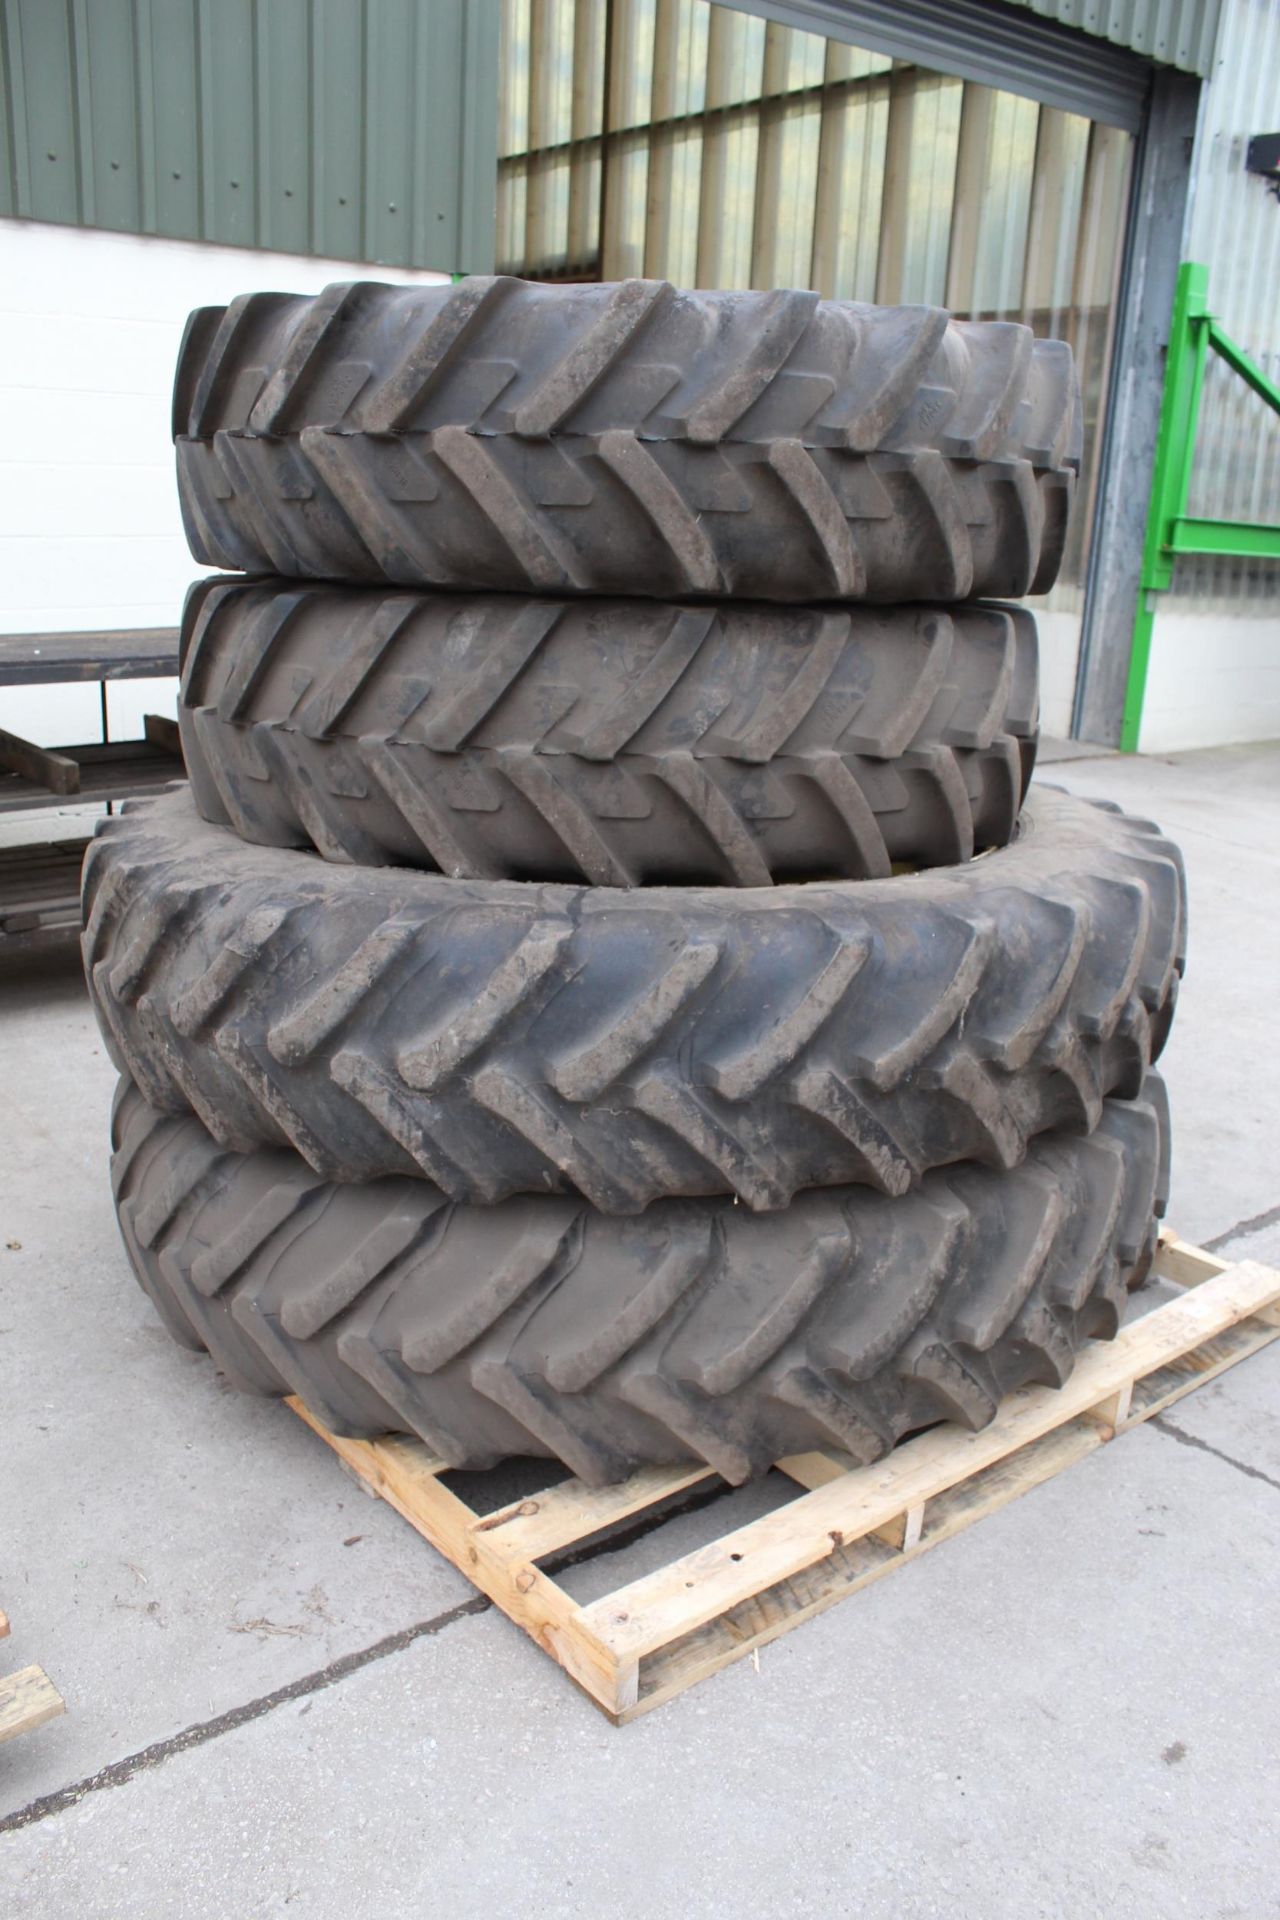 TWO 14.9 R46 ALLIANCE ROWCROP WHEELS AND TWO 380/85 R30 MICHELIN ROWCROP WHEELS +VAT